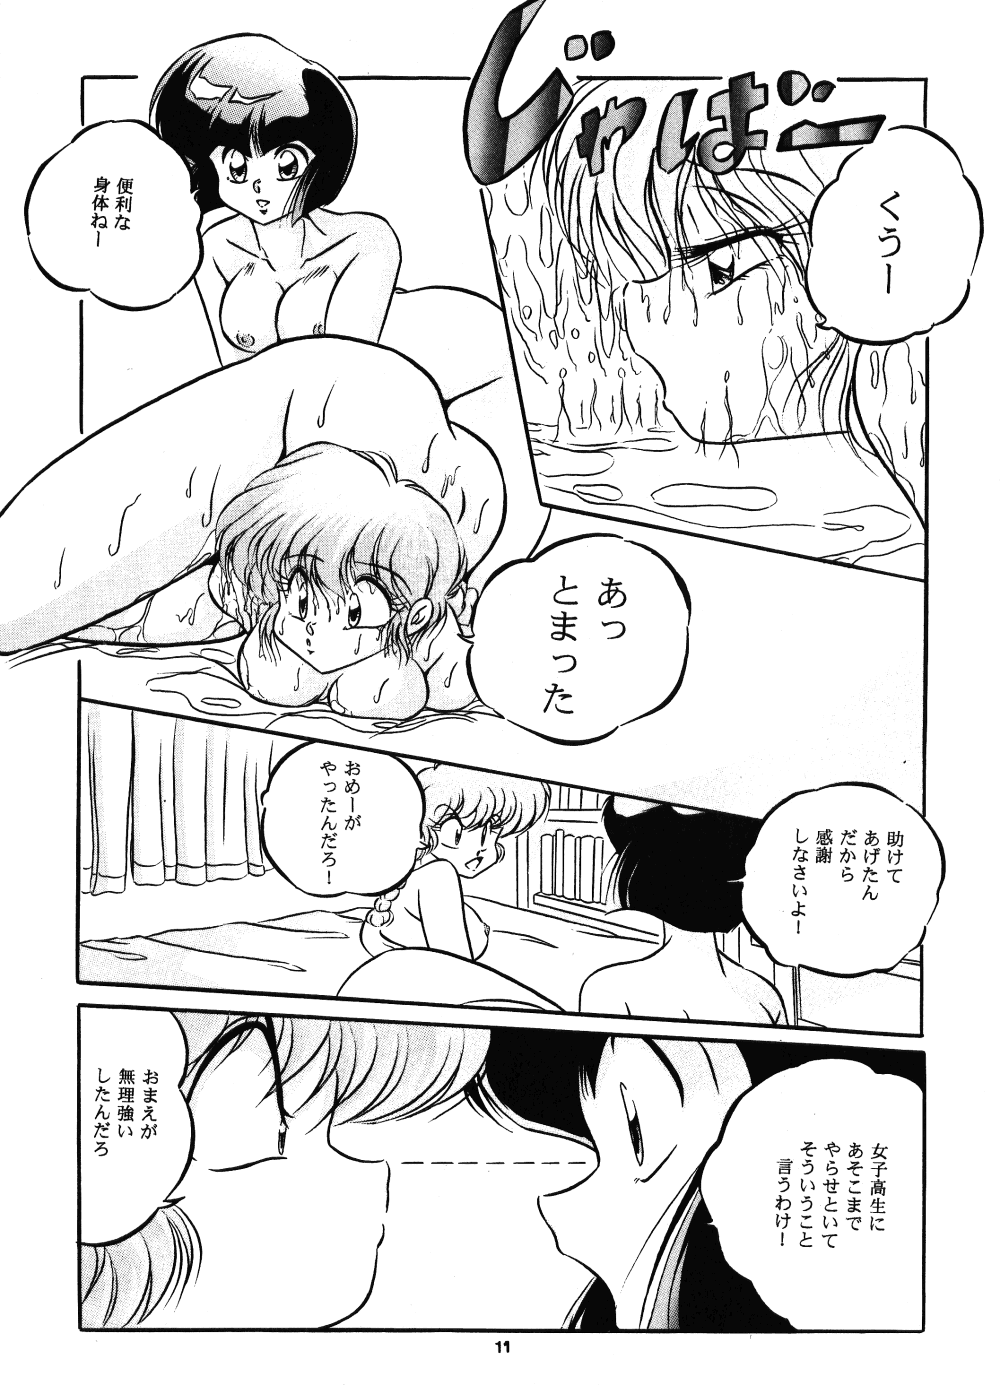 [C-Company] C-COMPANY SPECIAL STAGE 15 (Darkstalkers, Ranma 1/2) page 12 full